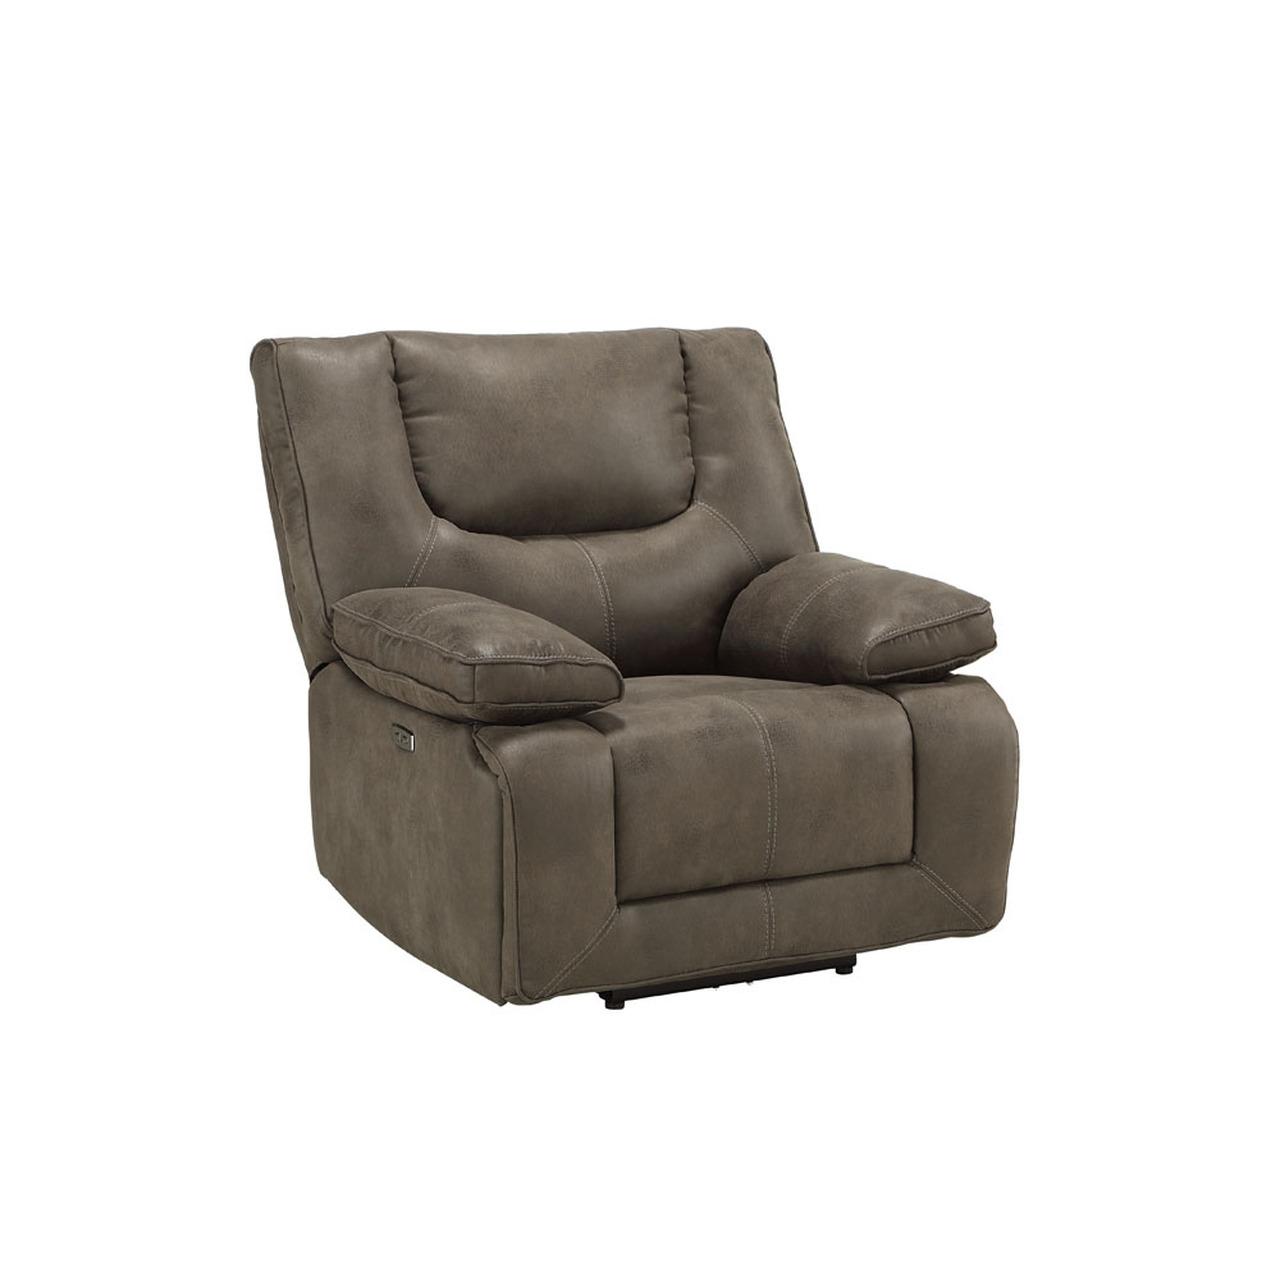 

    
Contemporary Dark Gray Leather Power Recliner by Acme Harumi 54897
